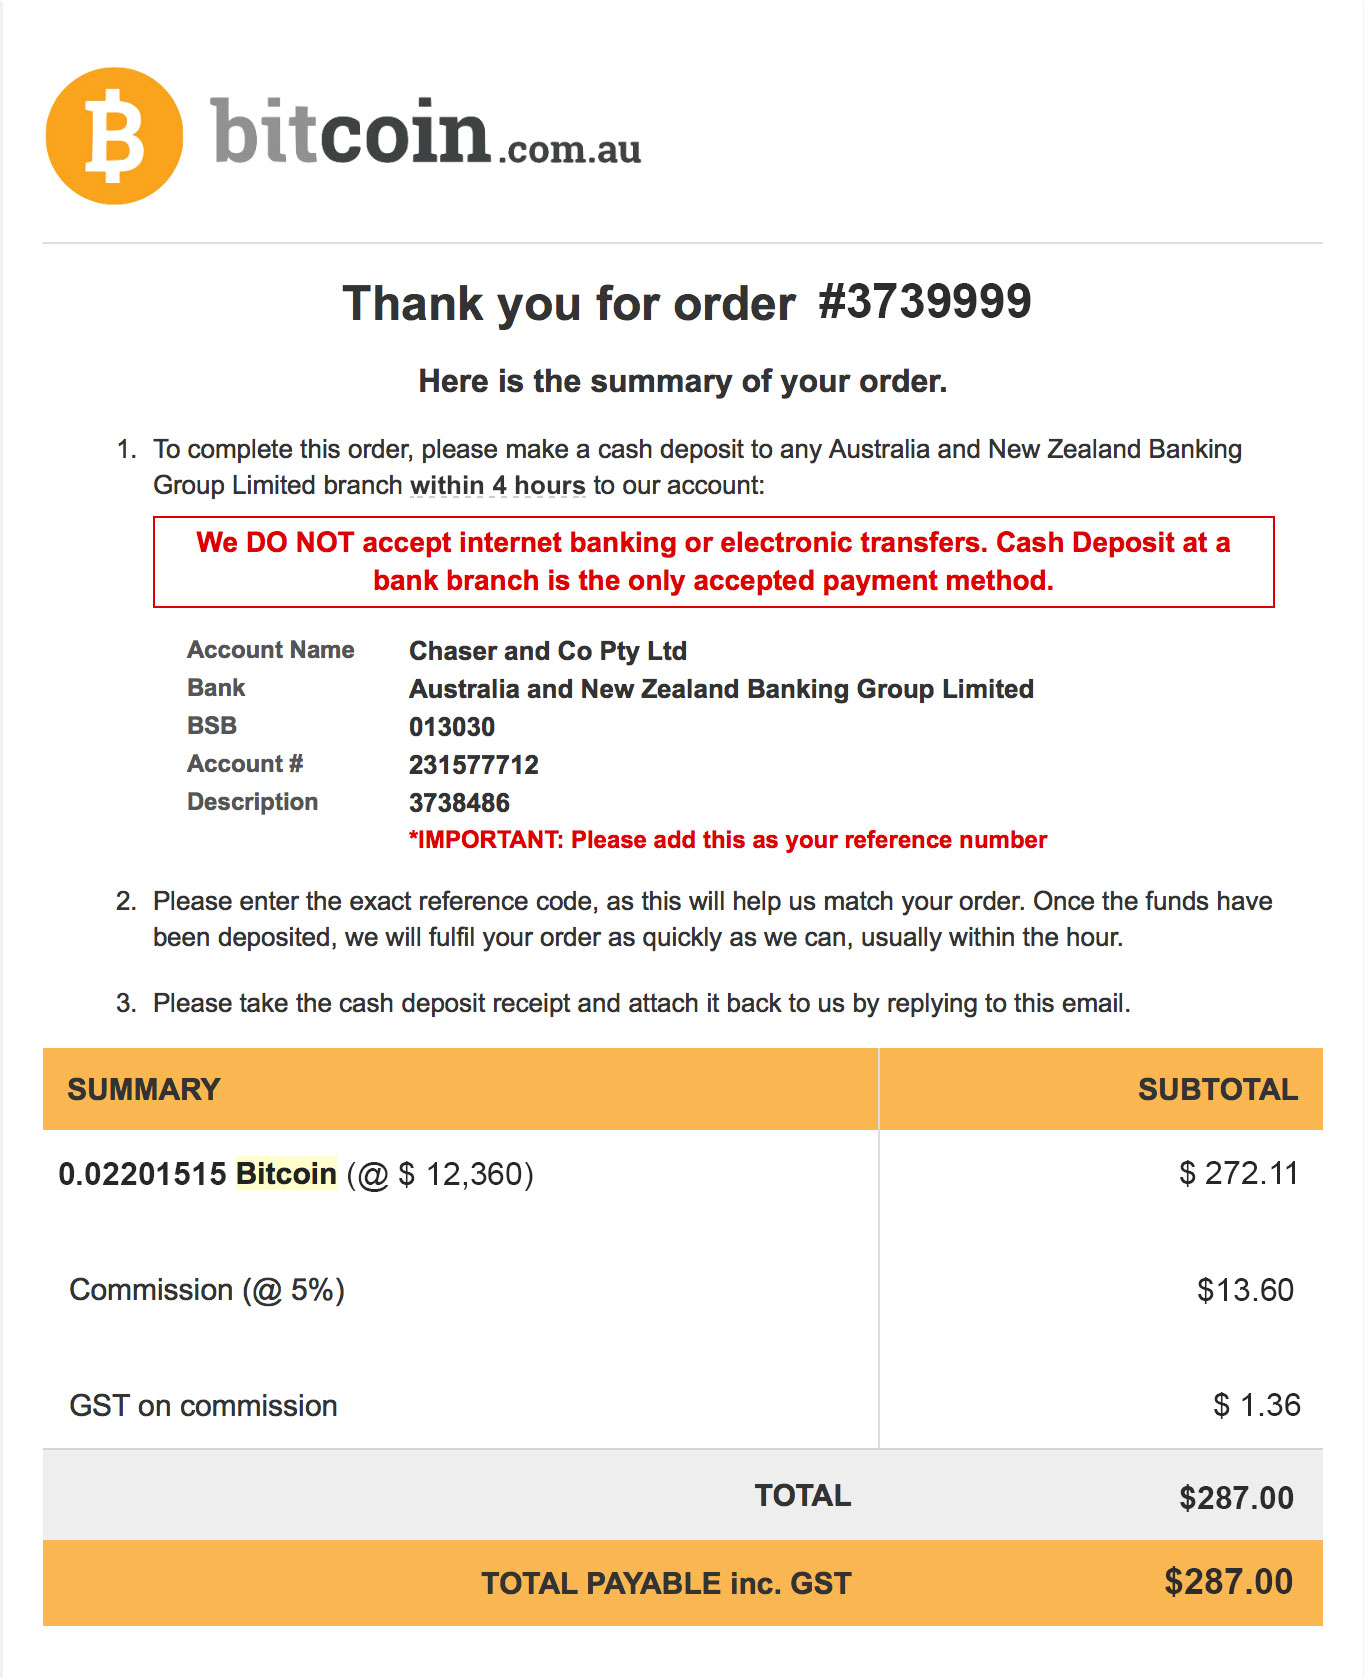 bittorrent coin contract address